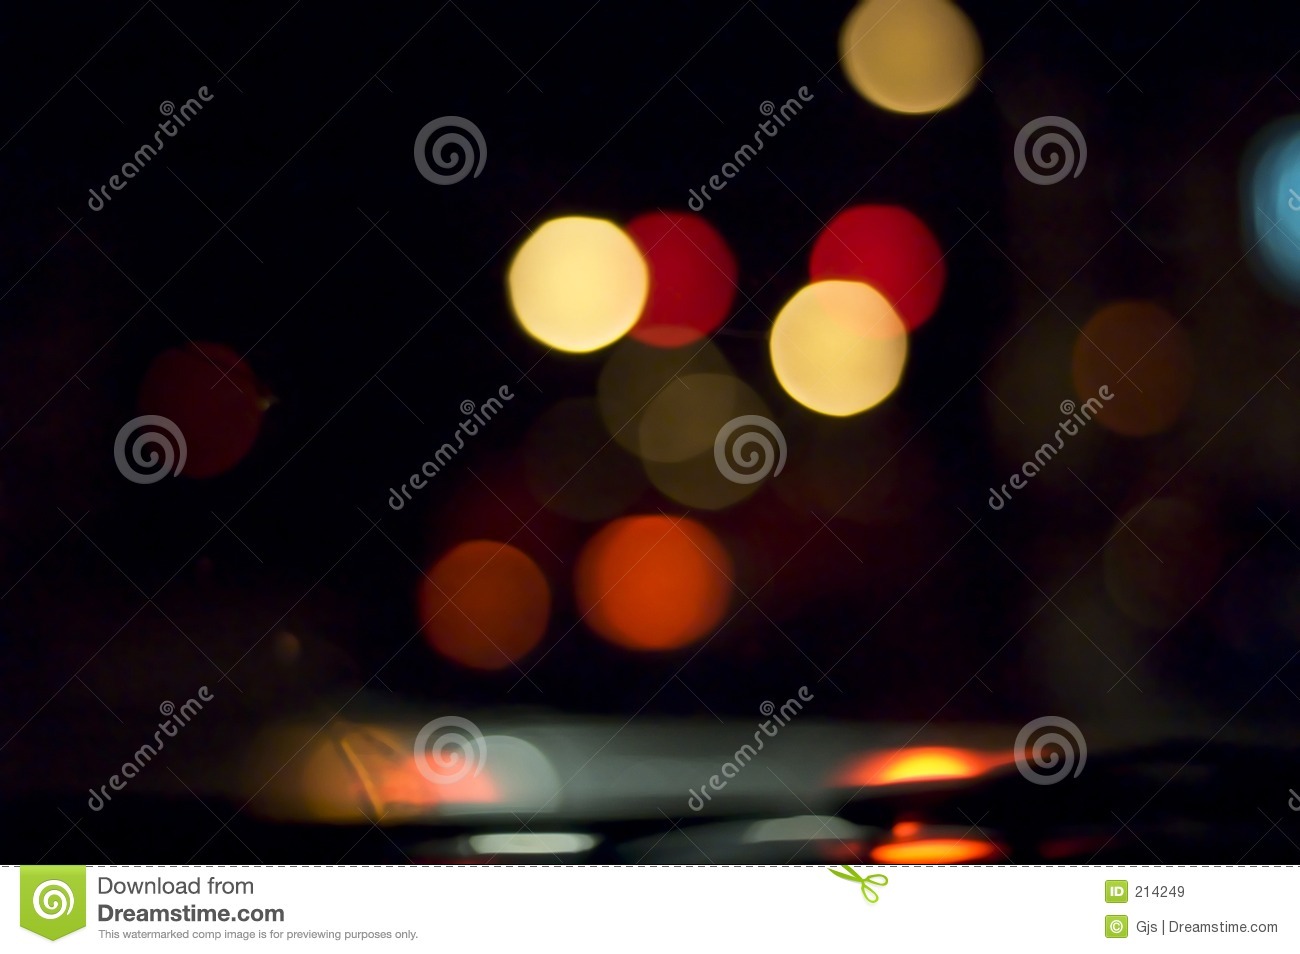 Blurred Vision While Driving Royalty Free Stock Images   Image  214249